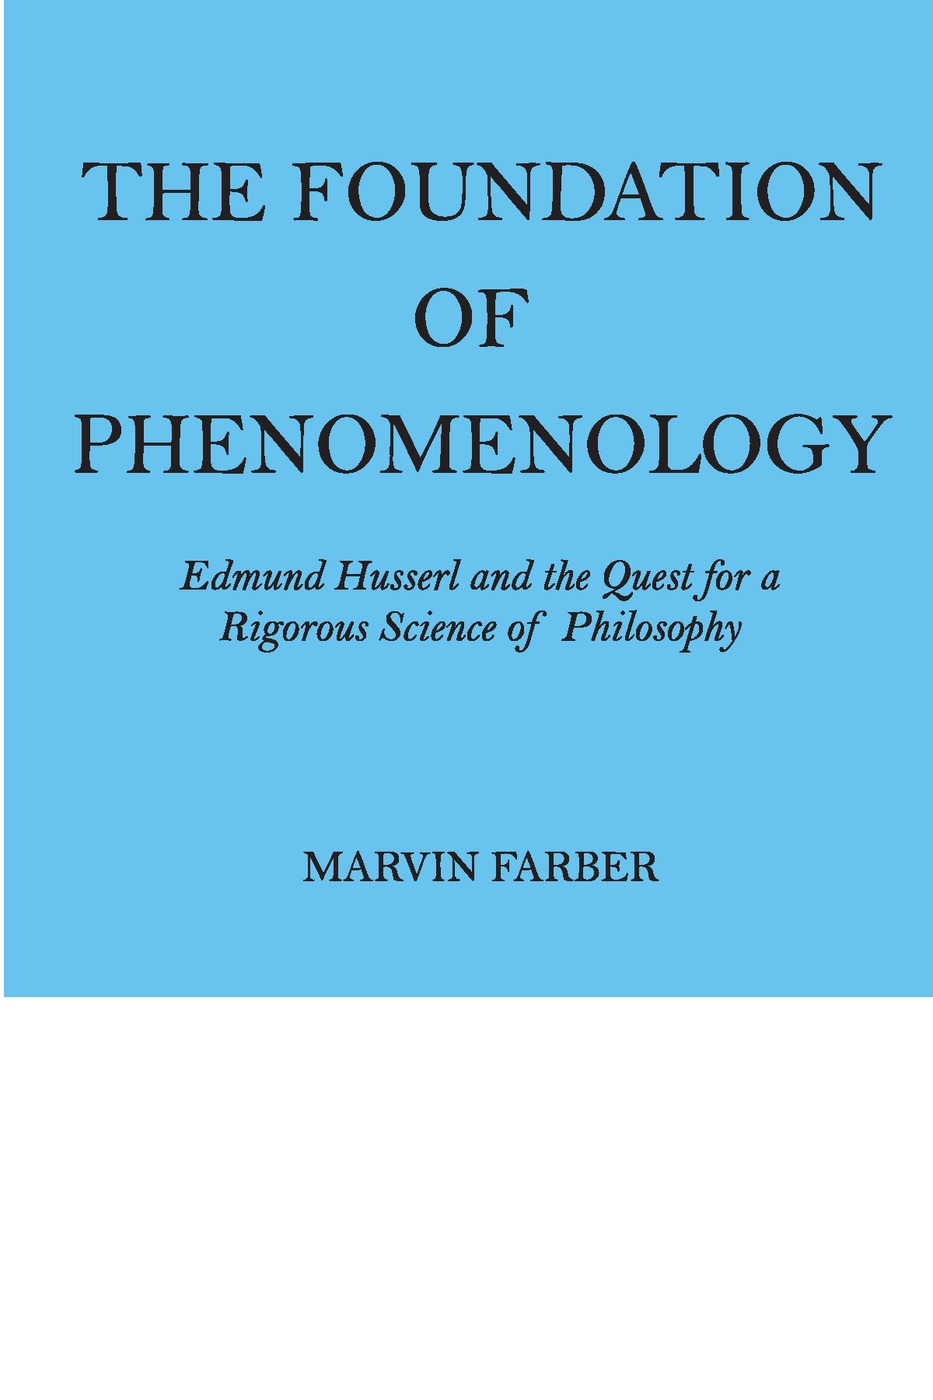 The Foundation of Phenomenology: Edmund Husserl And the Quest for a Rigorous Science of Philosophy